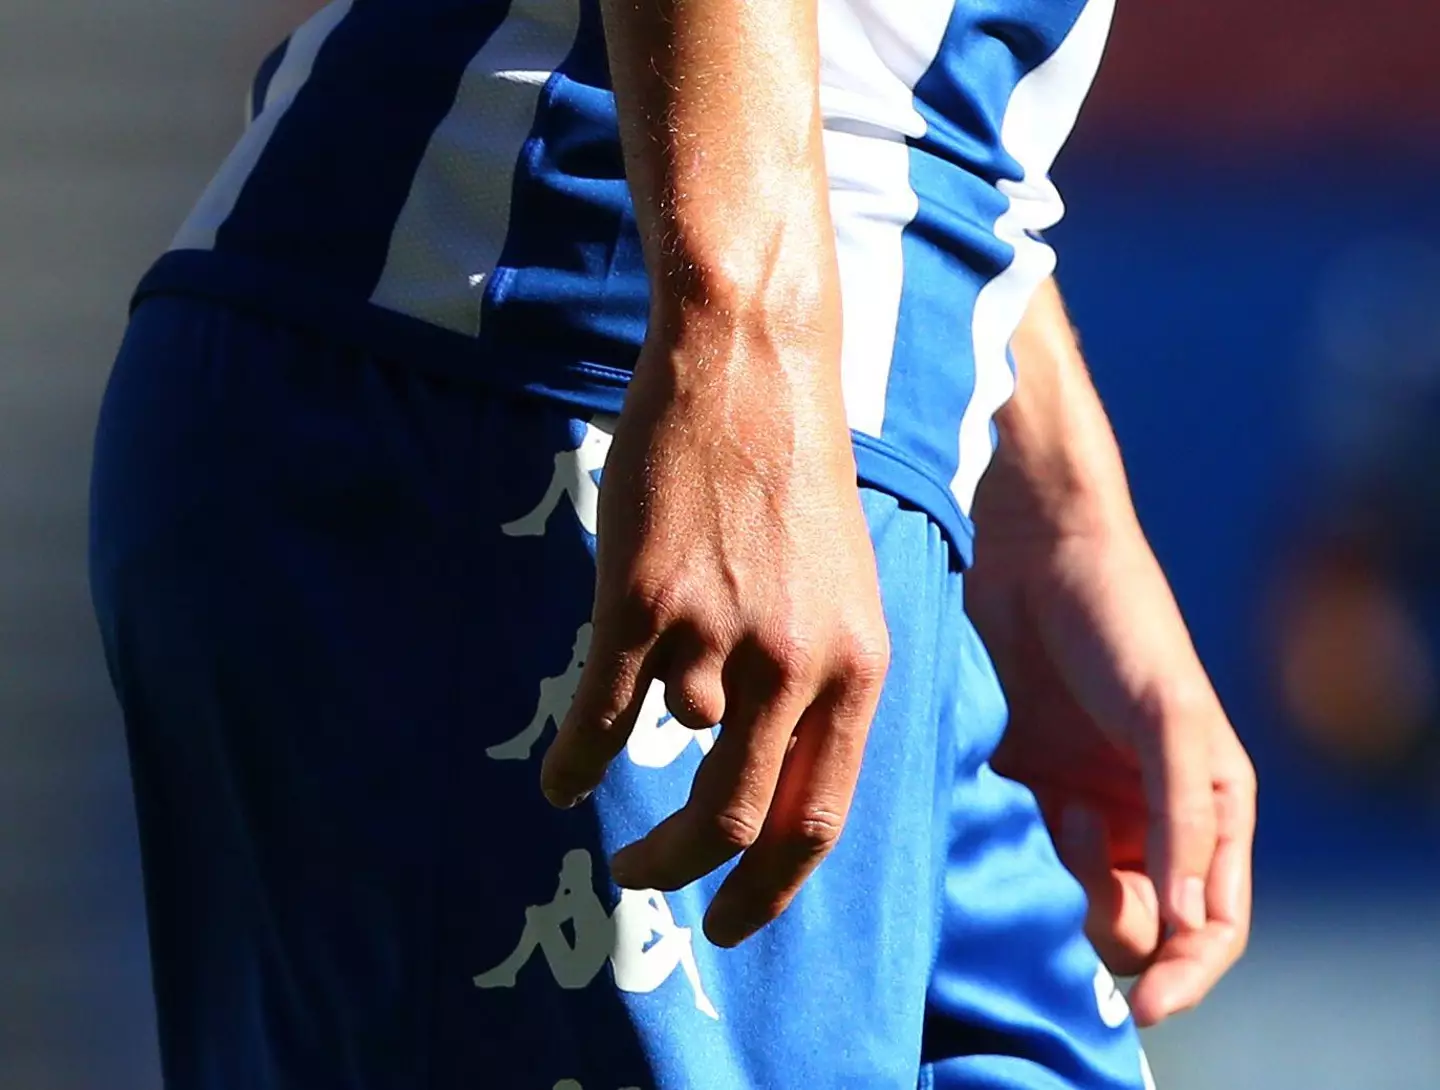 Burn's missing finger during his Wigan days. Image: PA Images